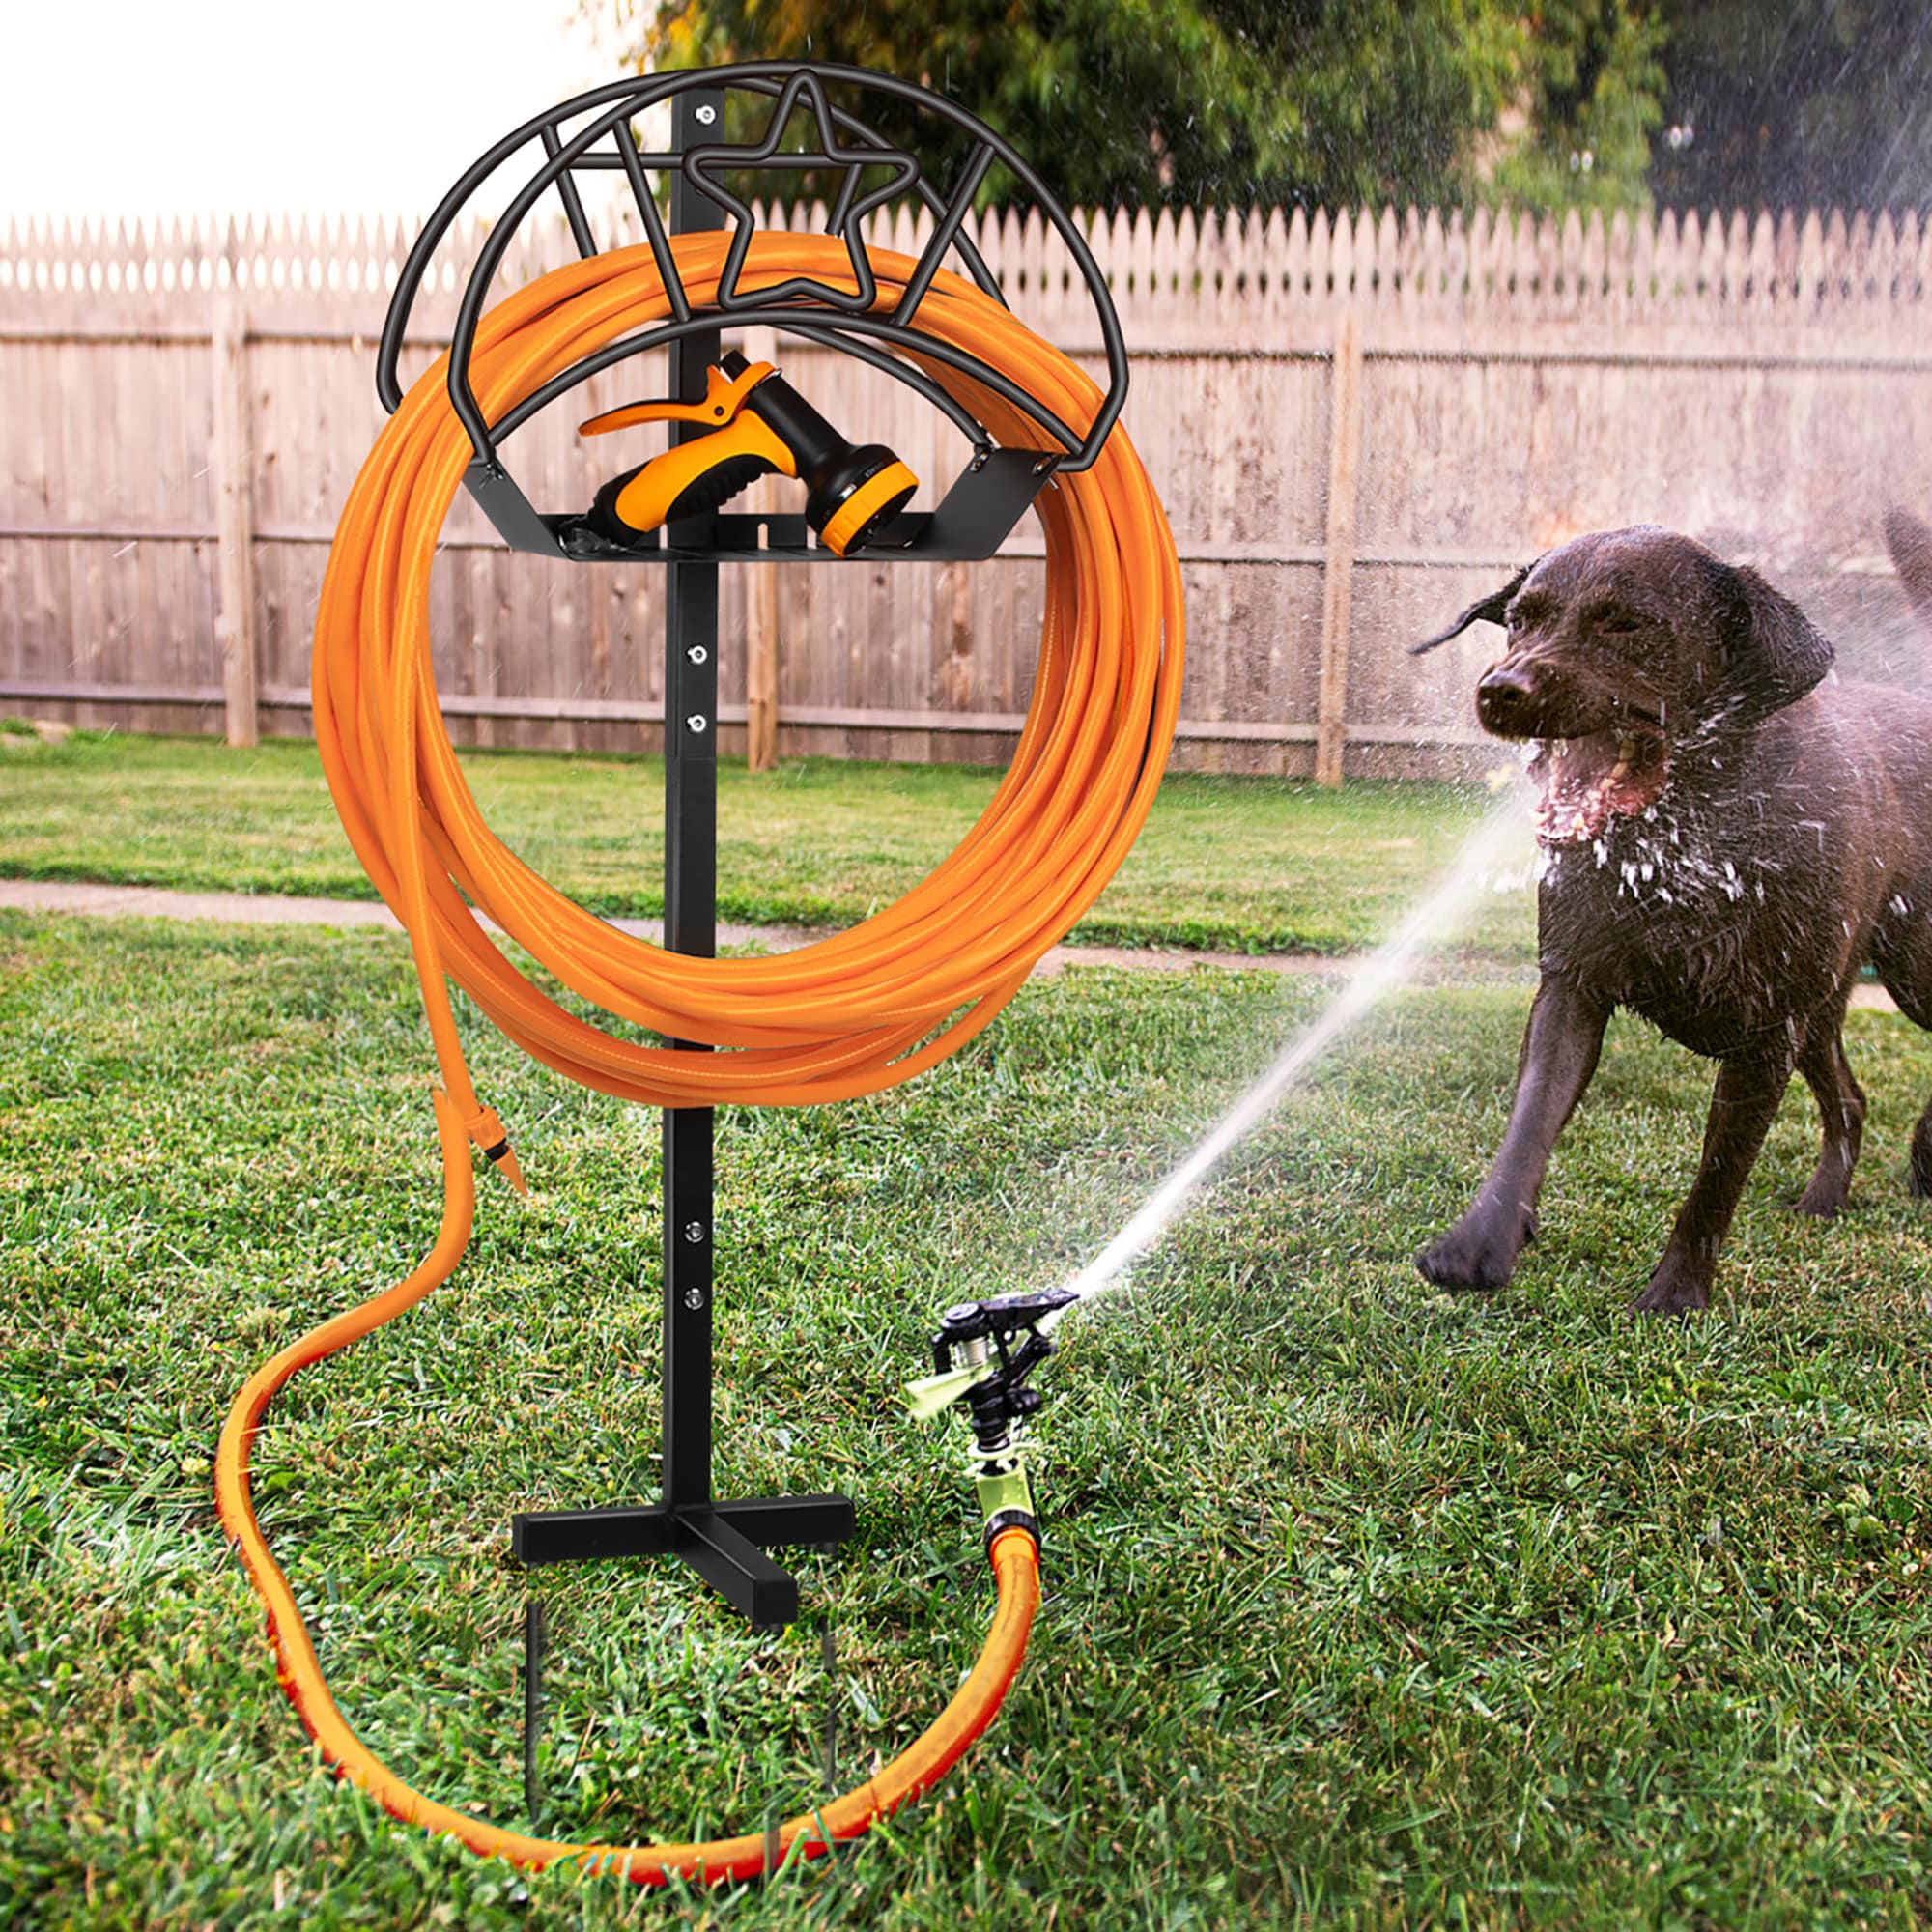 WolfFire Hose Reel Stand